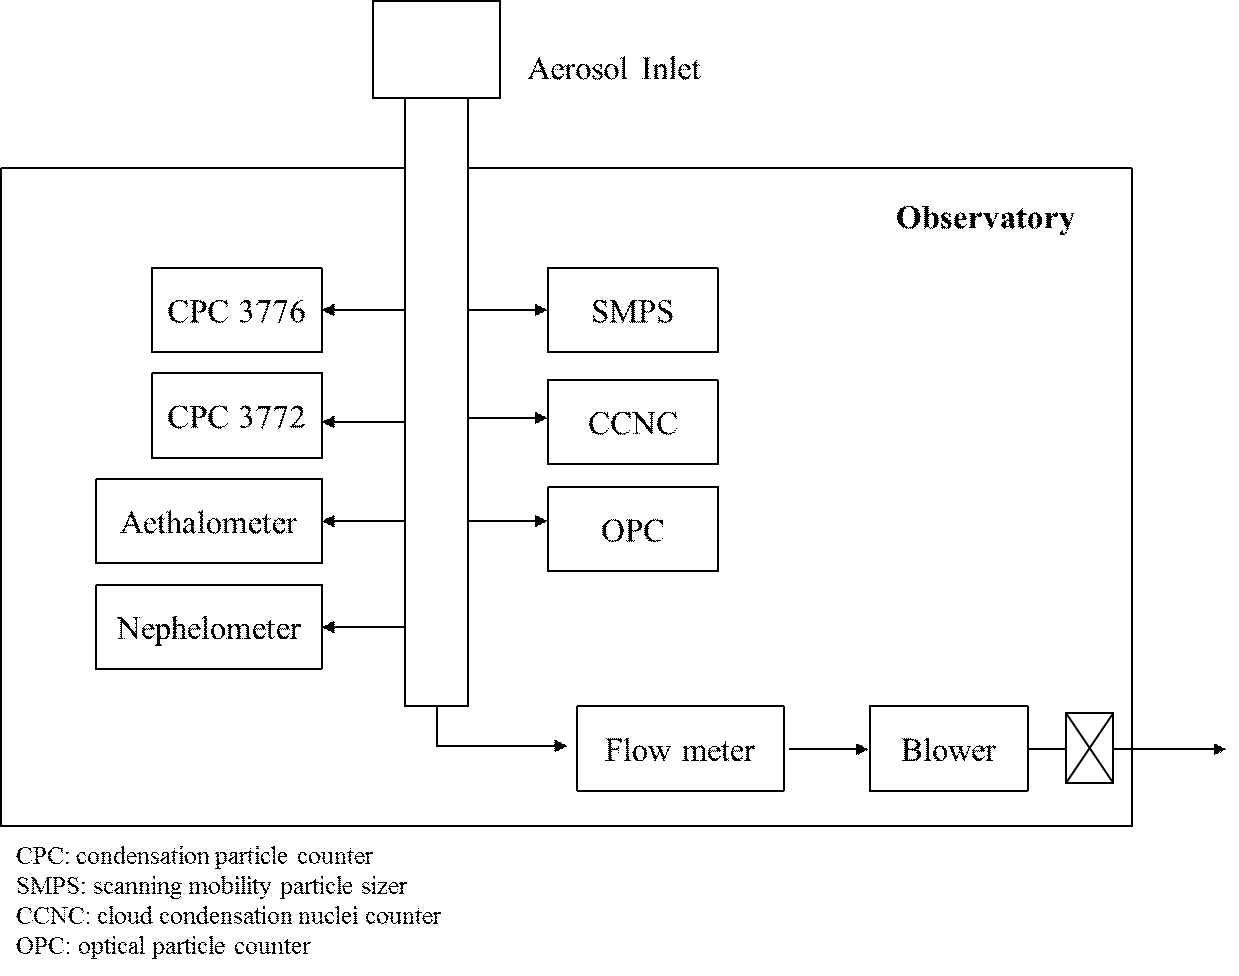 A schematic diagram for the observation methods used in this study.